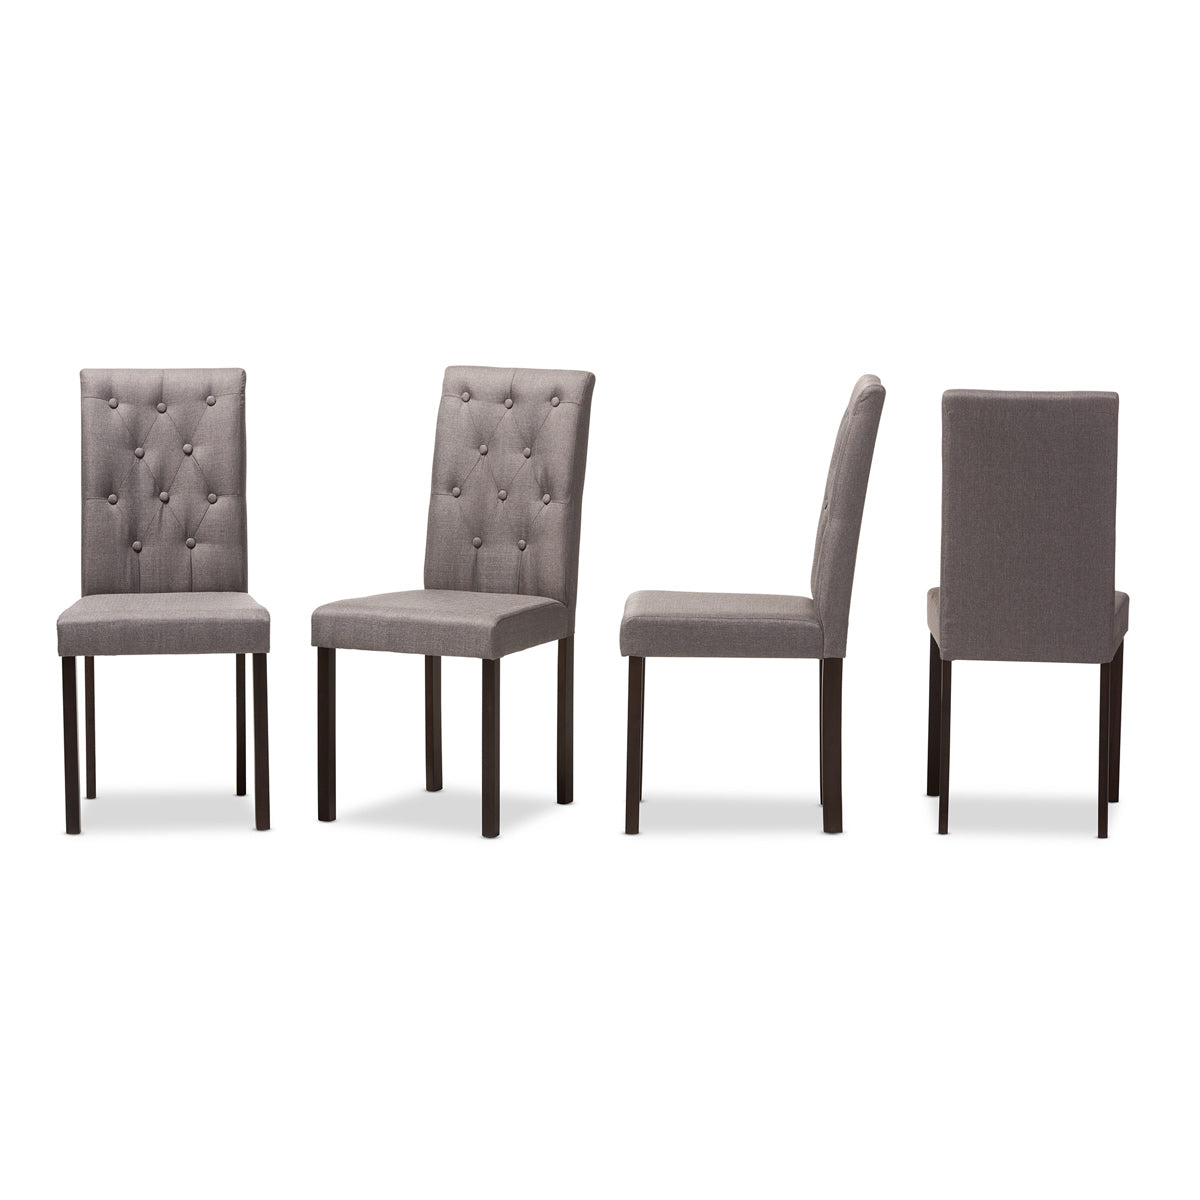 Baxton Studio Gardner Modern and Contemporary Dark Brown Finished Grey Fabric Upholstered Dining Chair (Set of 4) Baxton Studio-dining chair-Minimal And Modern - 2